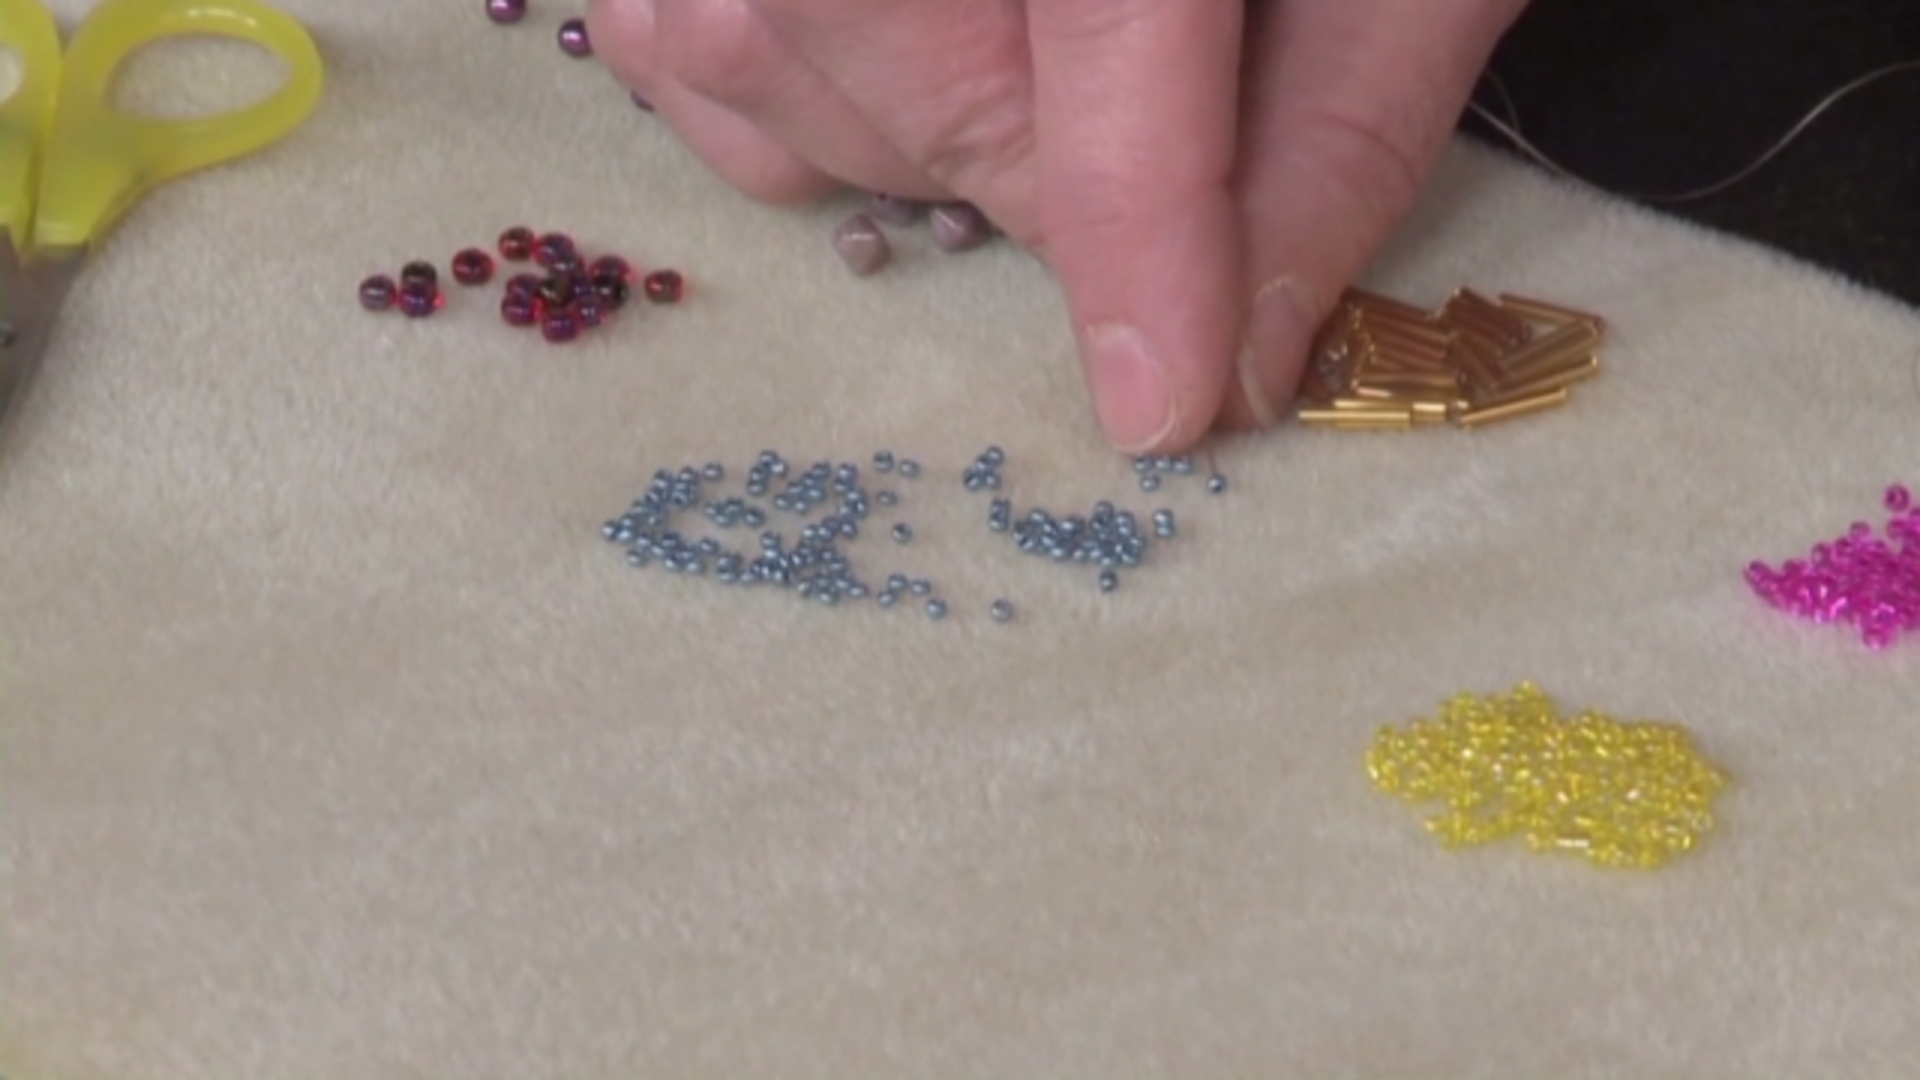 Do you know what beading is?, Articles